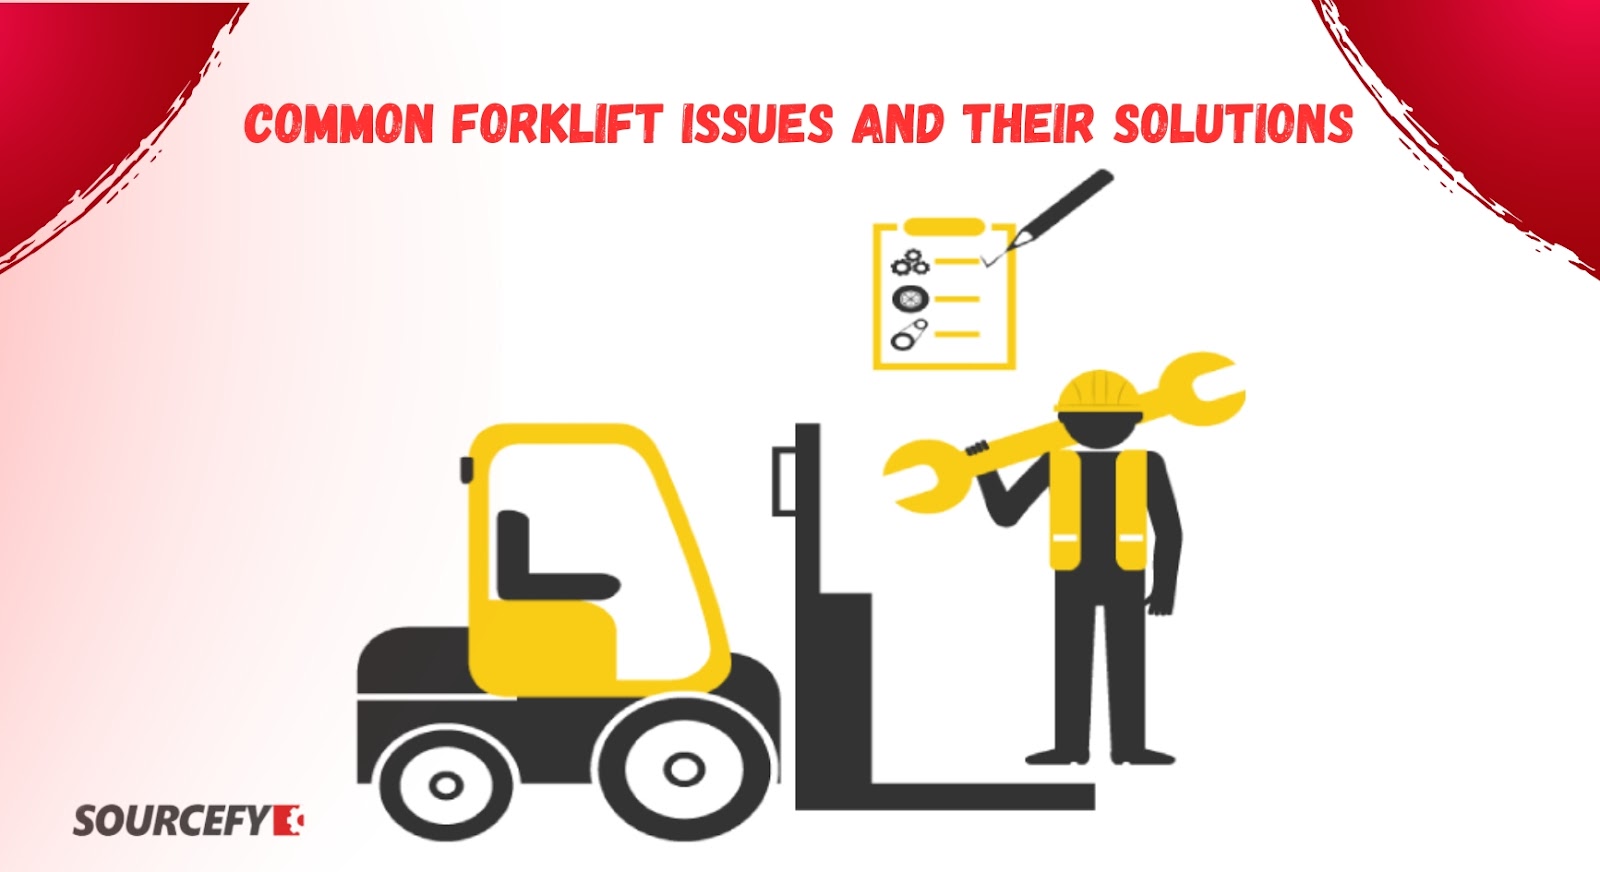 Common Forklift Issues and Their Solutions